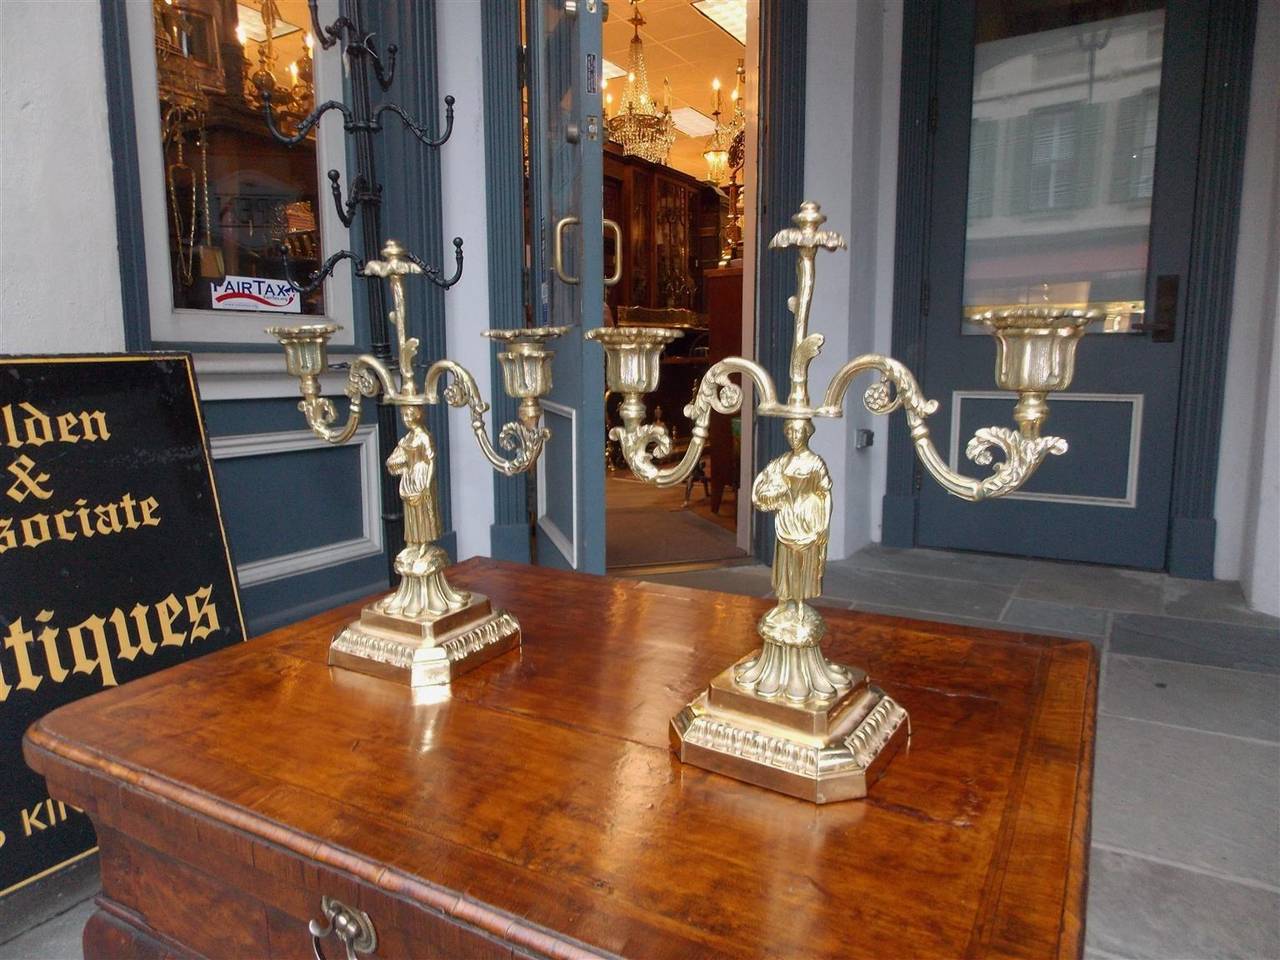 Pair of French brass two-arm figural candlesticks with ladies holding fruit baskets, scrolled floral arms, decorative floral medallions, original removable bobeches, and resting on squared plinths with lambs tongue motif. Candlesticks are candle